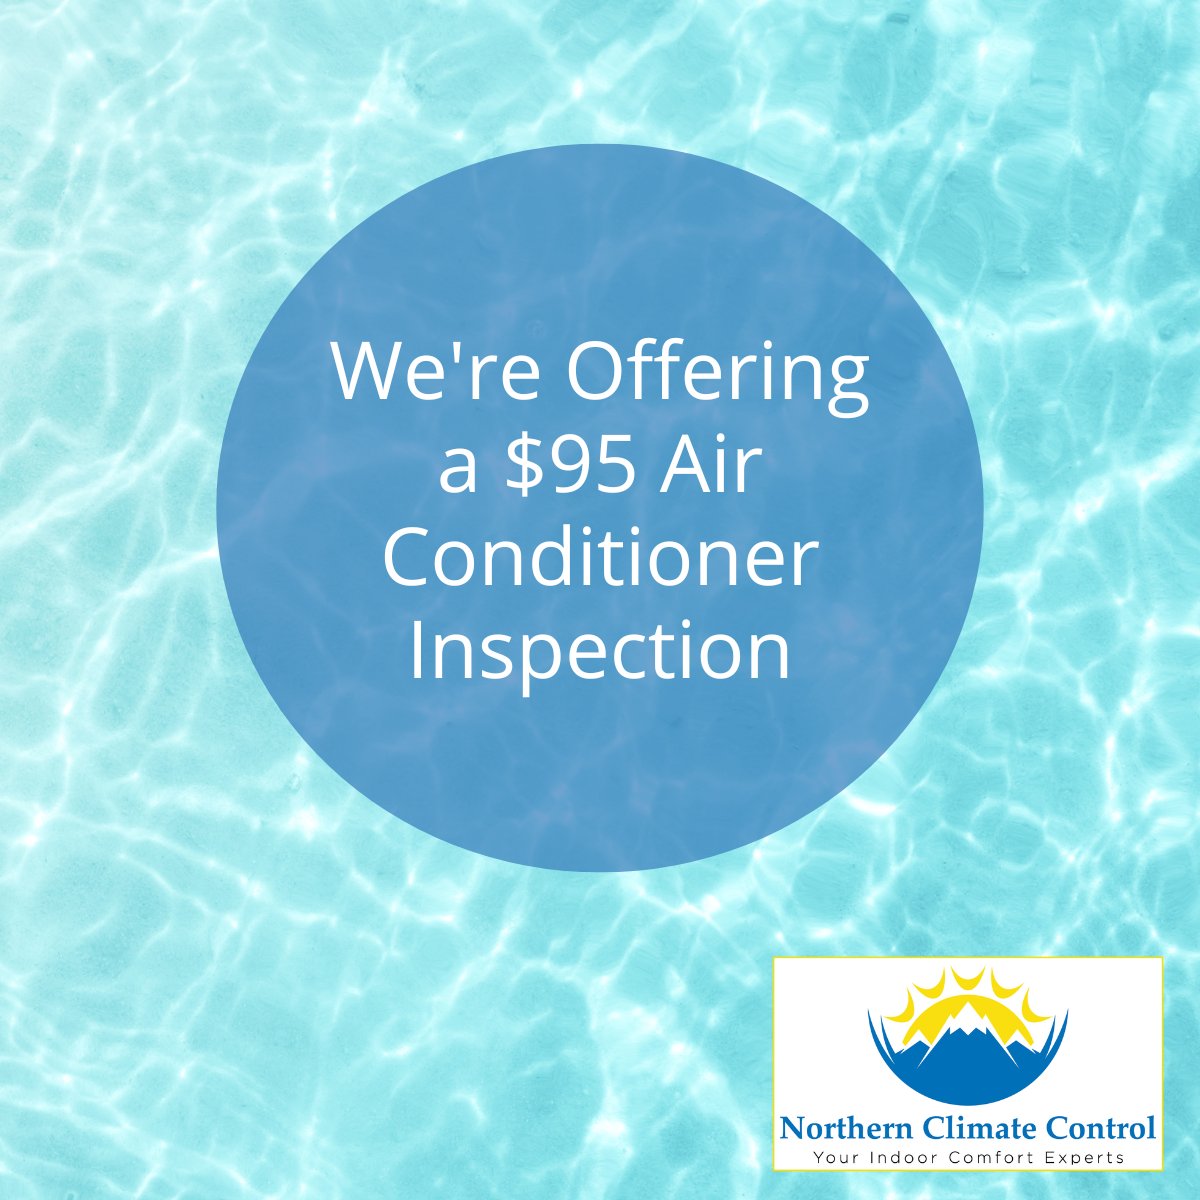 Stay cool this summer! We're offering a $95 air conditioner inspection with minor cleaning.

Contact us for an appointment.

#HVACcontractors #HVACexperts #HVACColorado #HVACService #HVACTech #HVACDenver #HVACSpecial